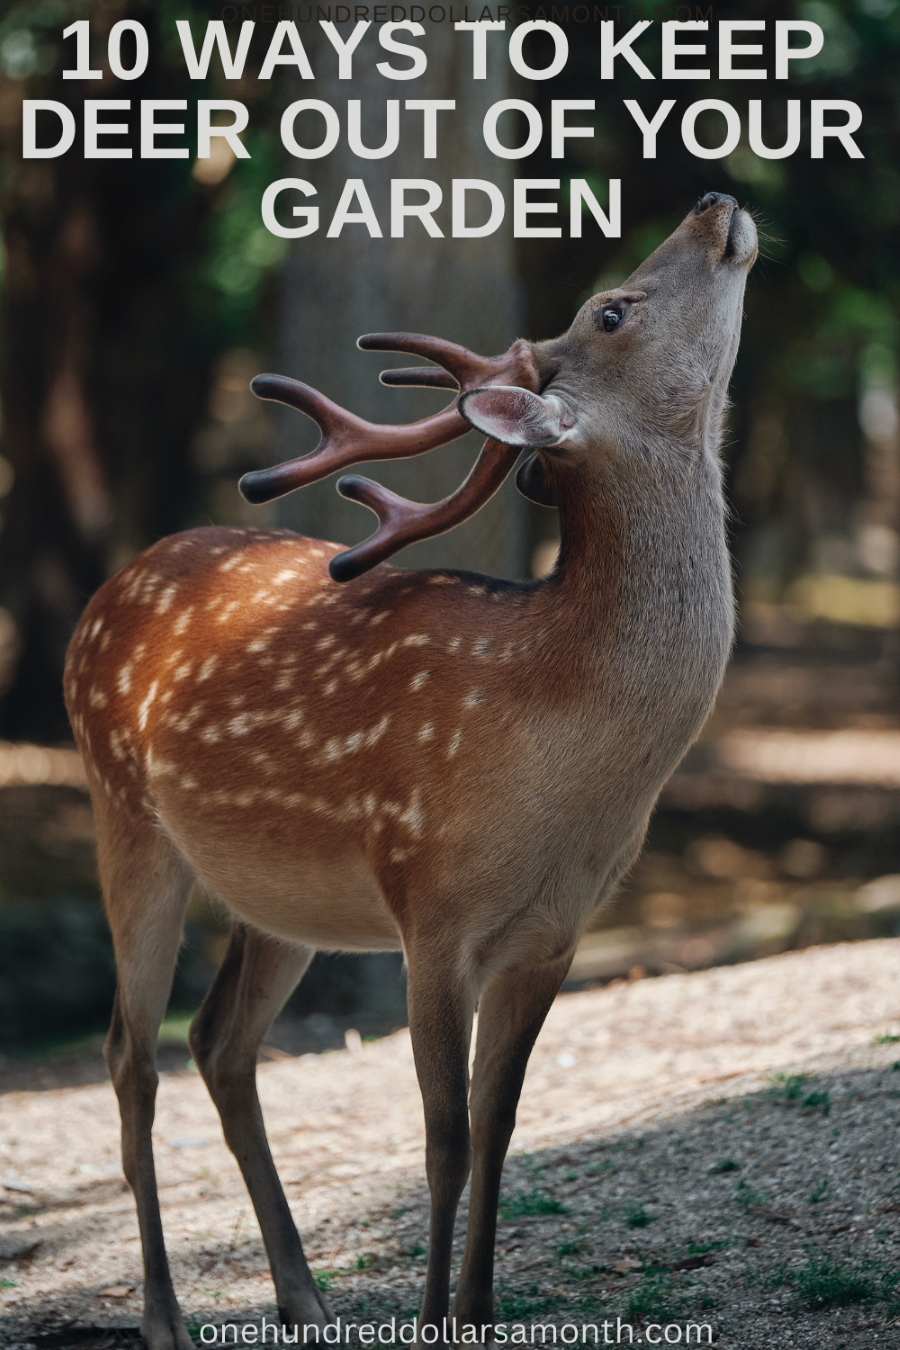 10 Ways to Keep Deer Out of Your Garden